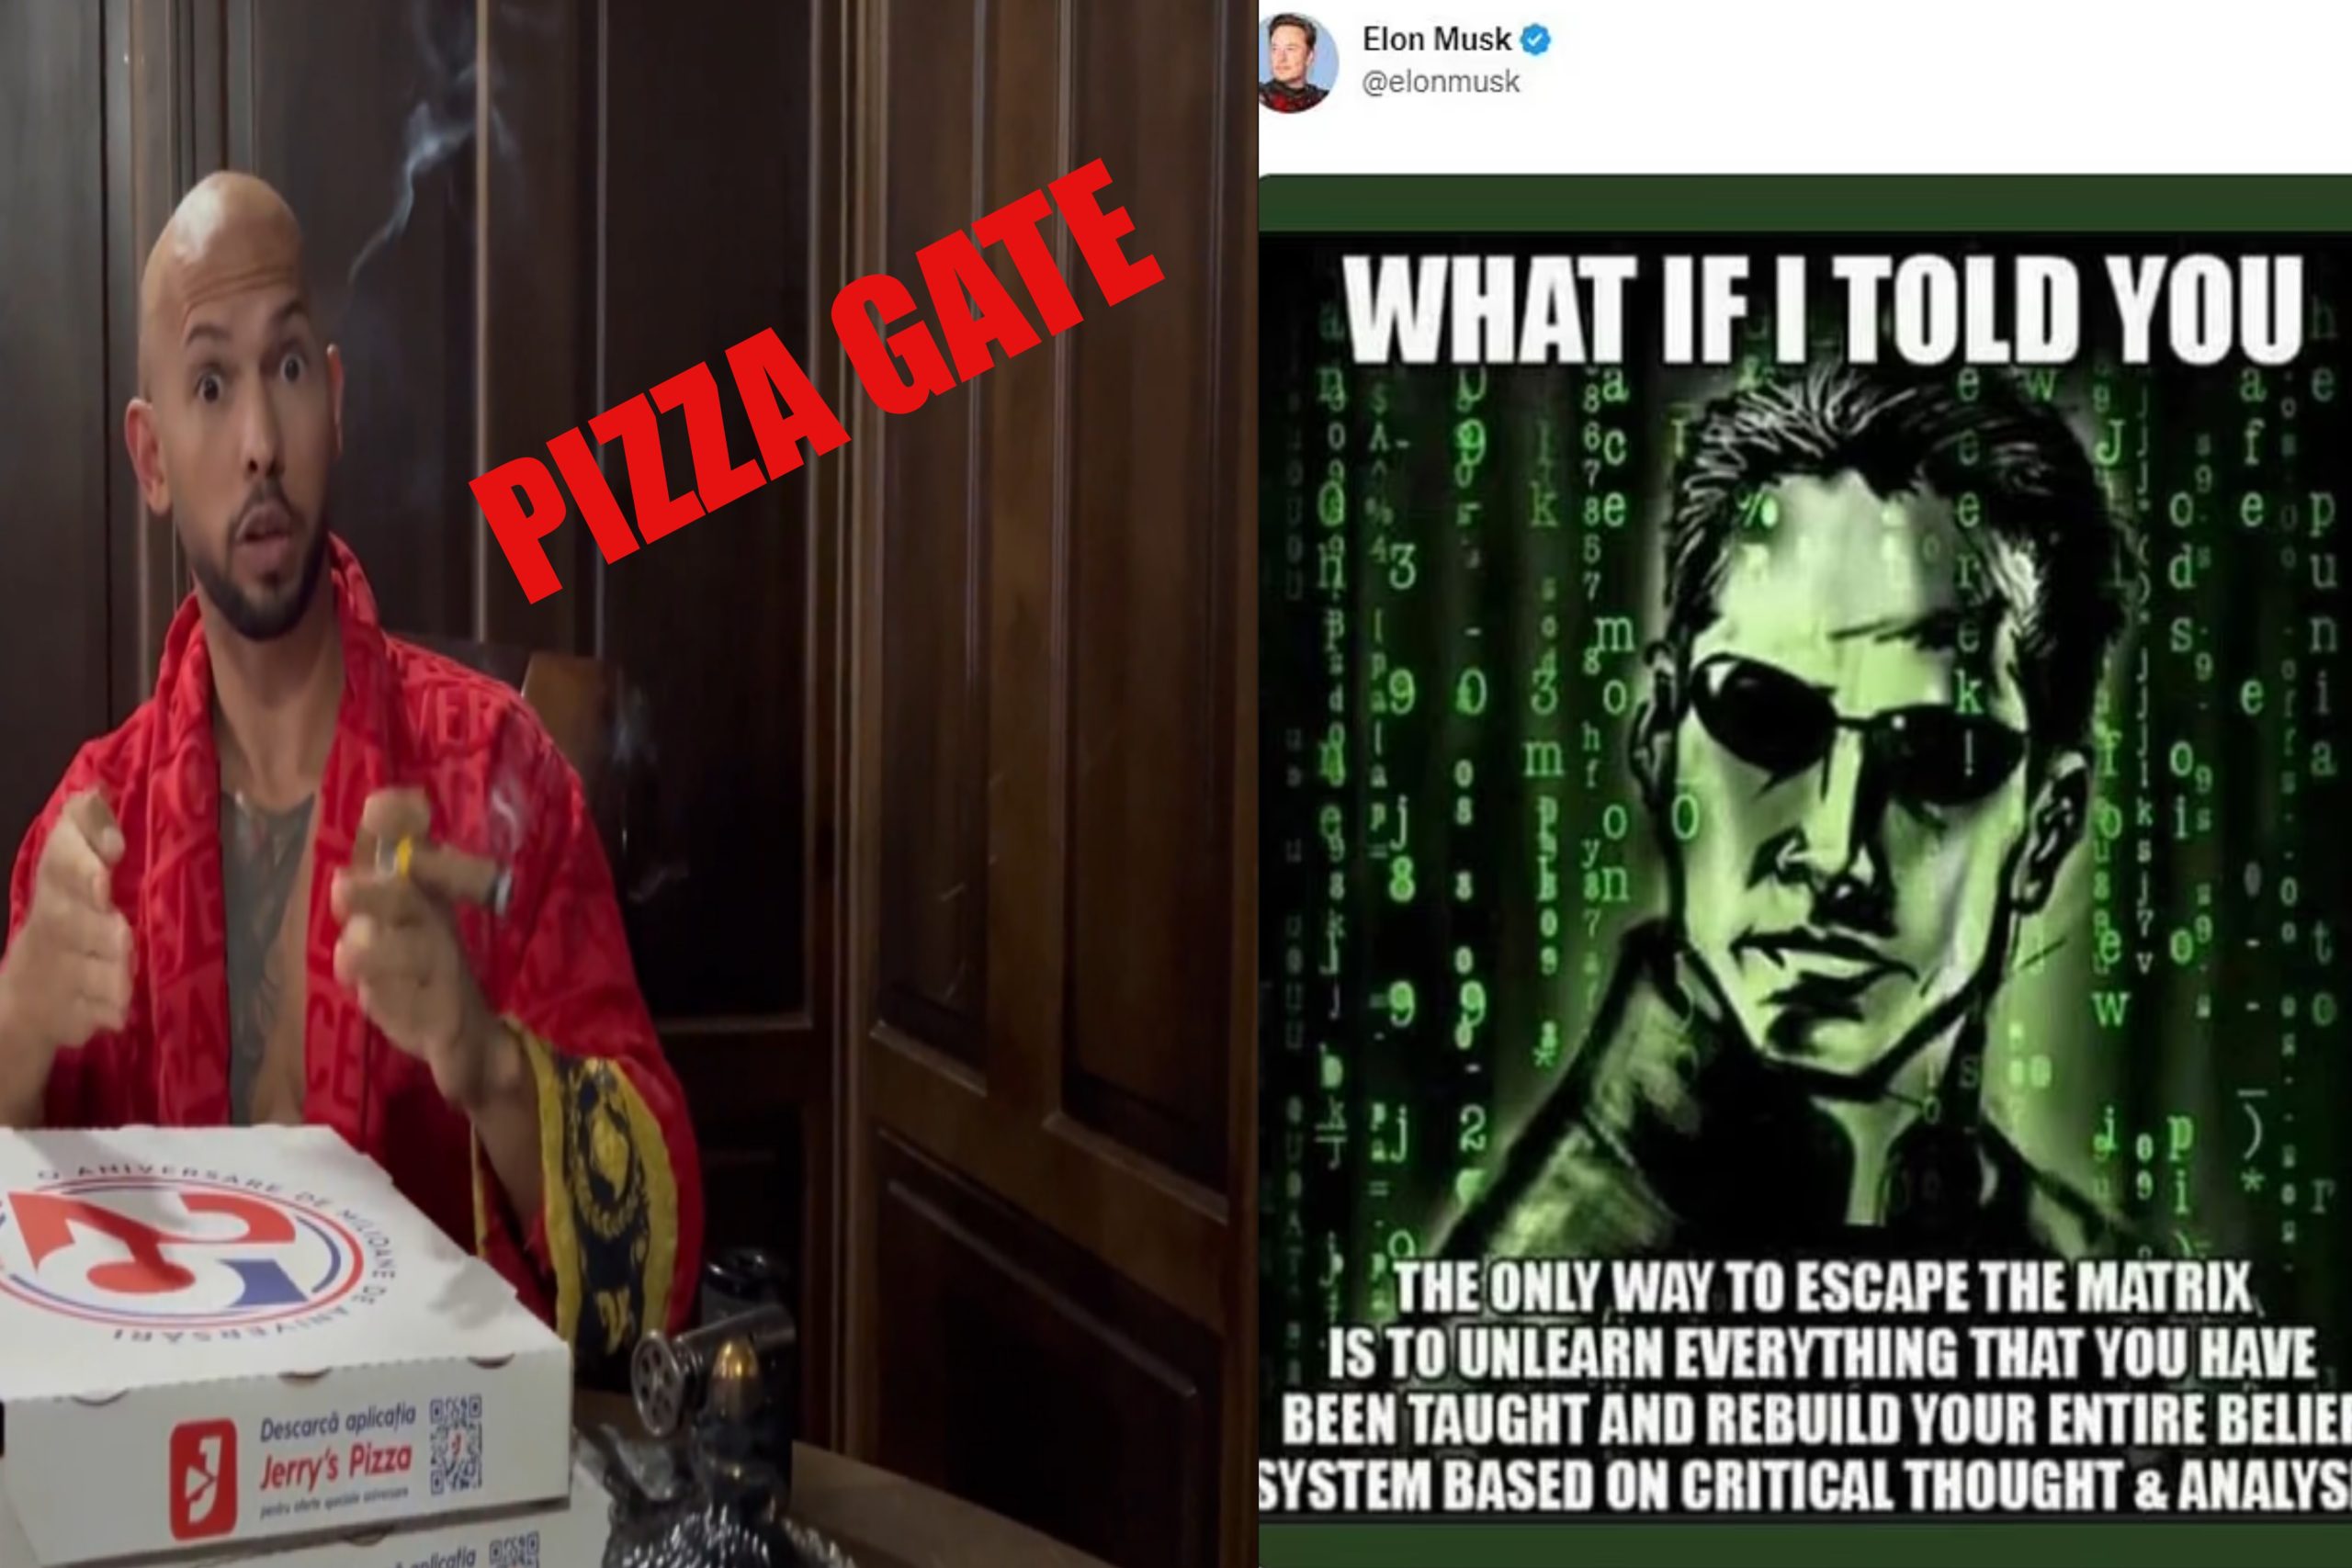 Elon Musk mocks disgraced influencer Andrew Tate and his ‘Matrix’ defense following his arrest for sex trafficking in Romania